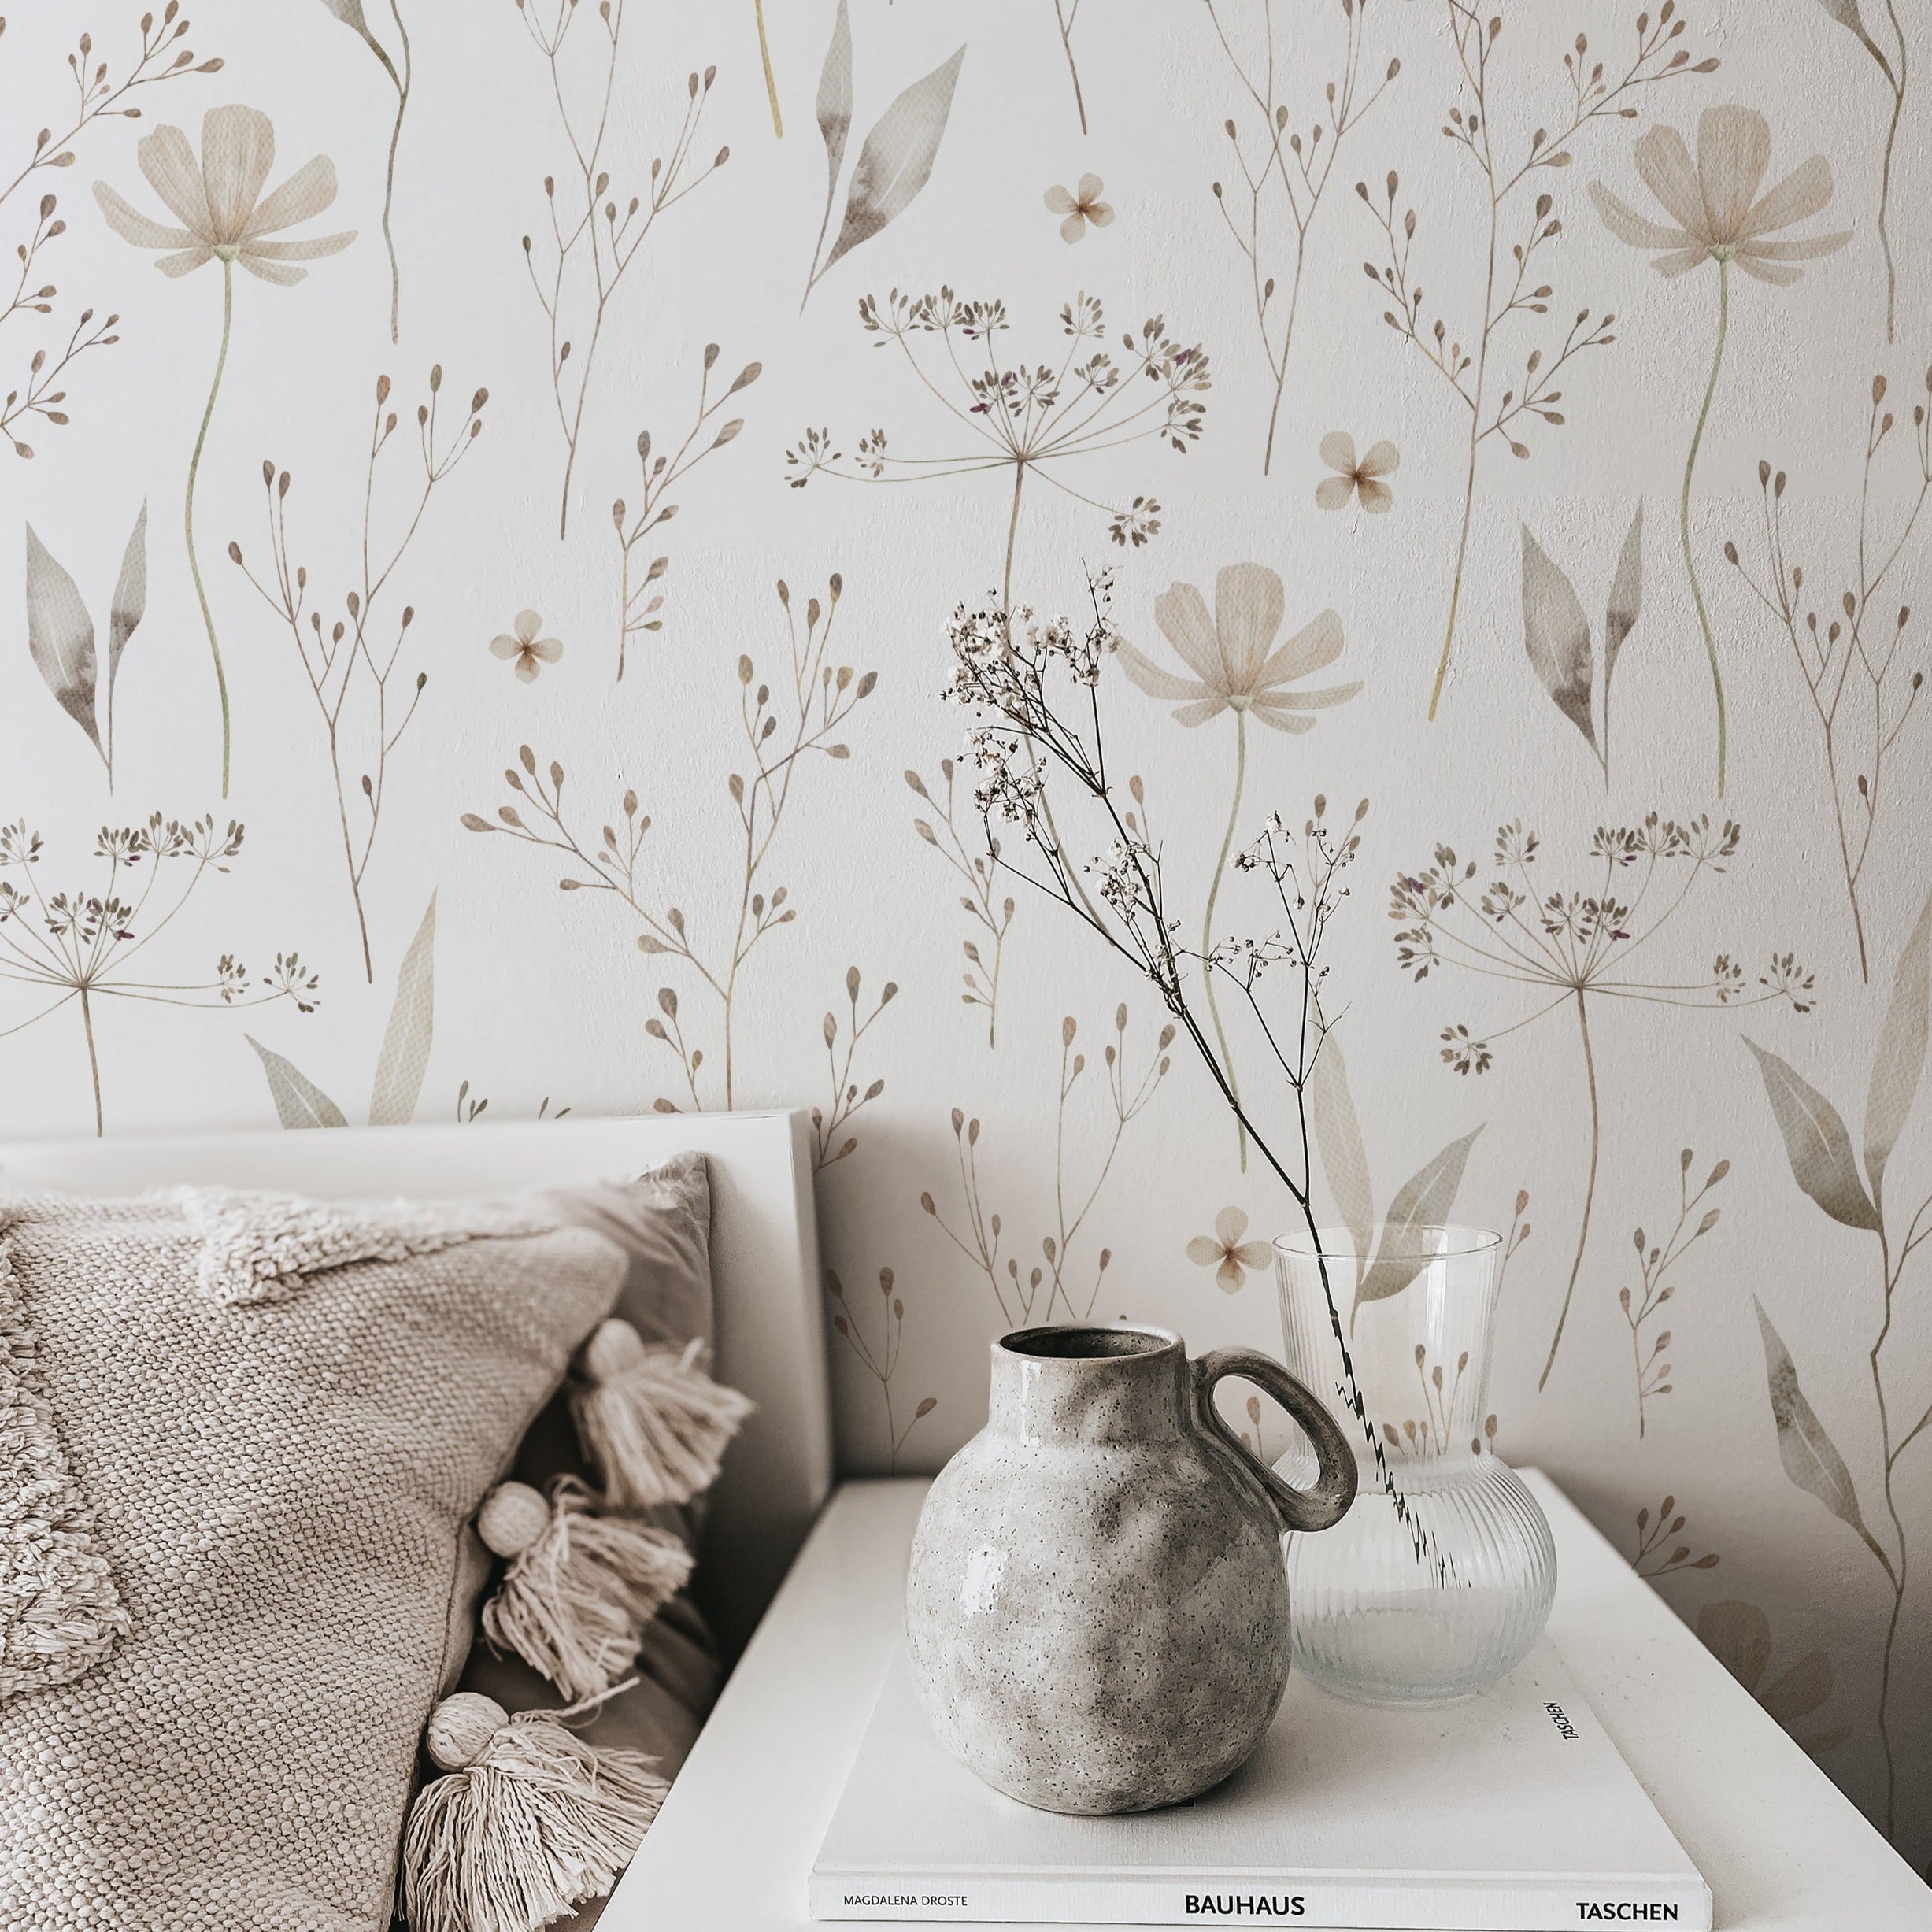 A cozy corner with Tranquil Bloom Wallpaper, illustrating a delicate botanical design of slender flora and pastel flowers that provide a sense of calm and a touch of nature's quiet beauty to the room.